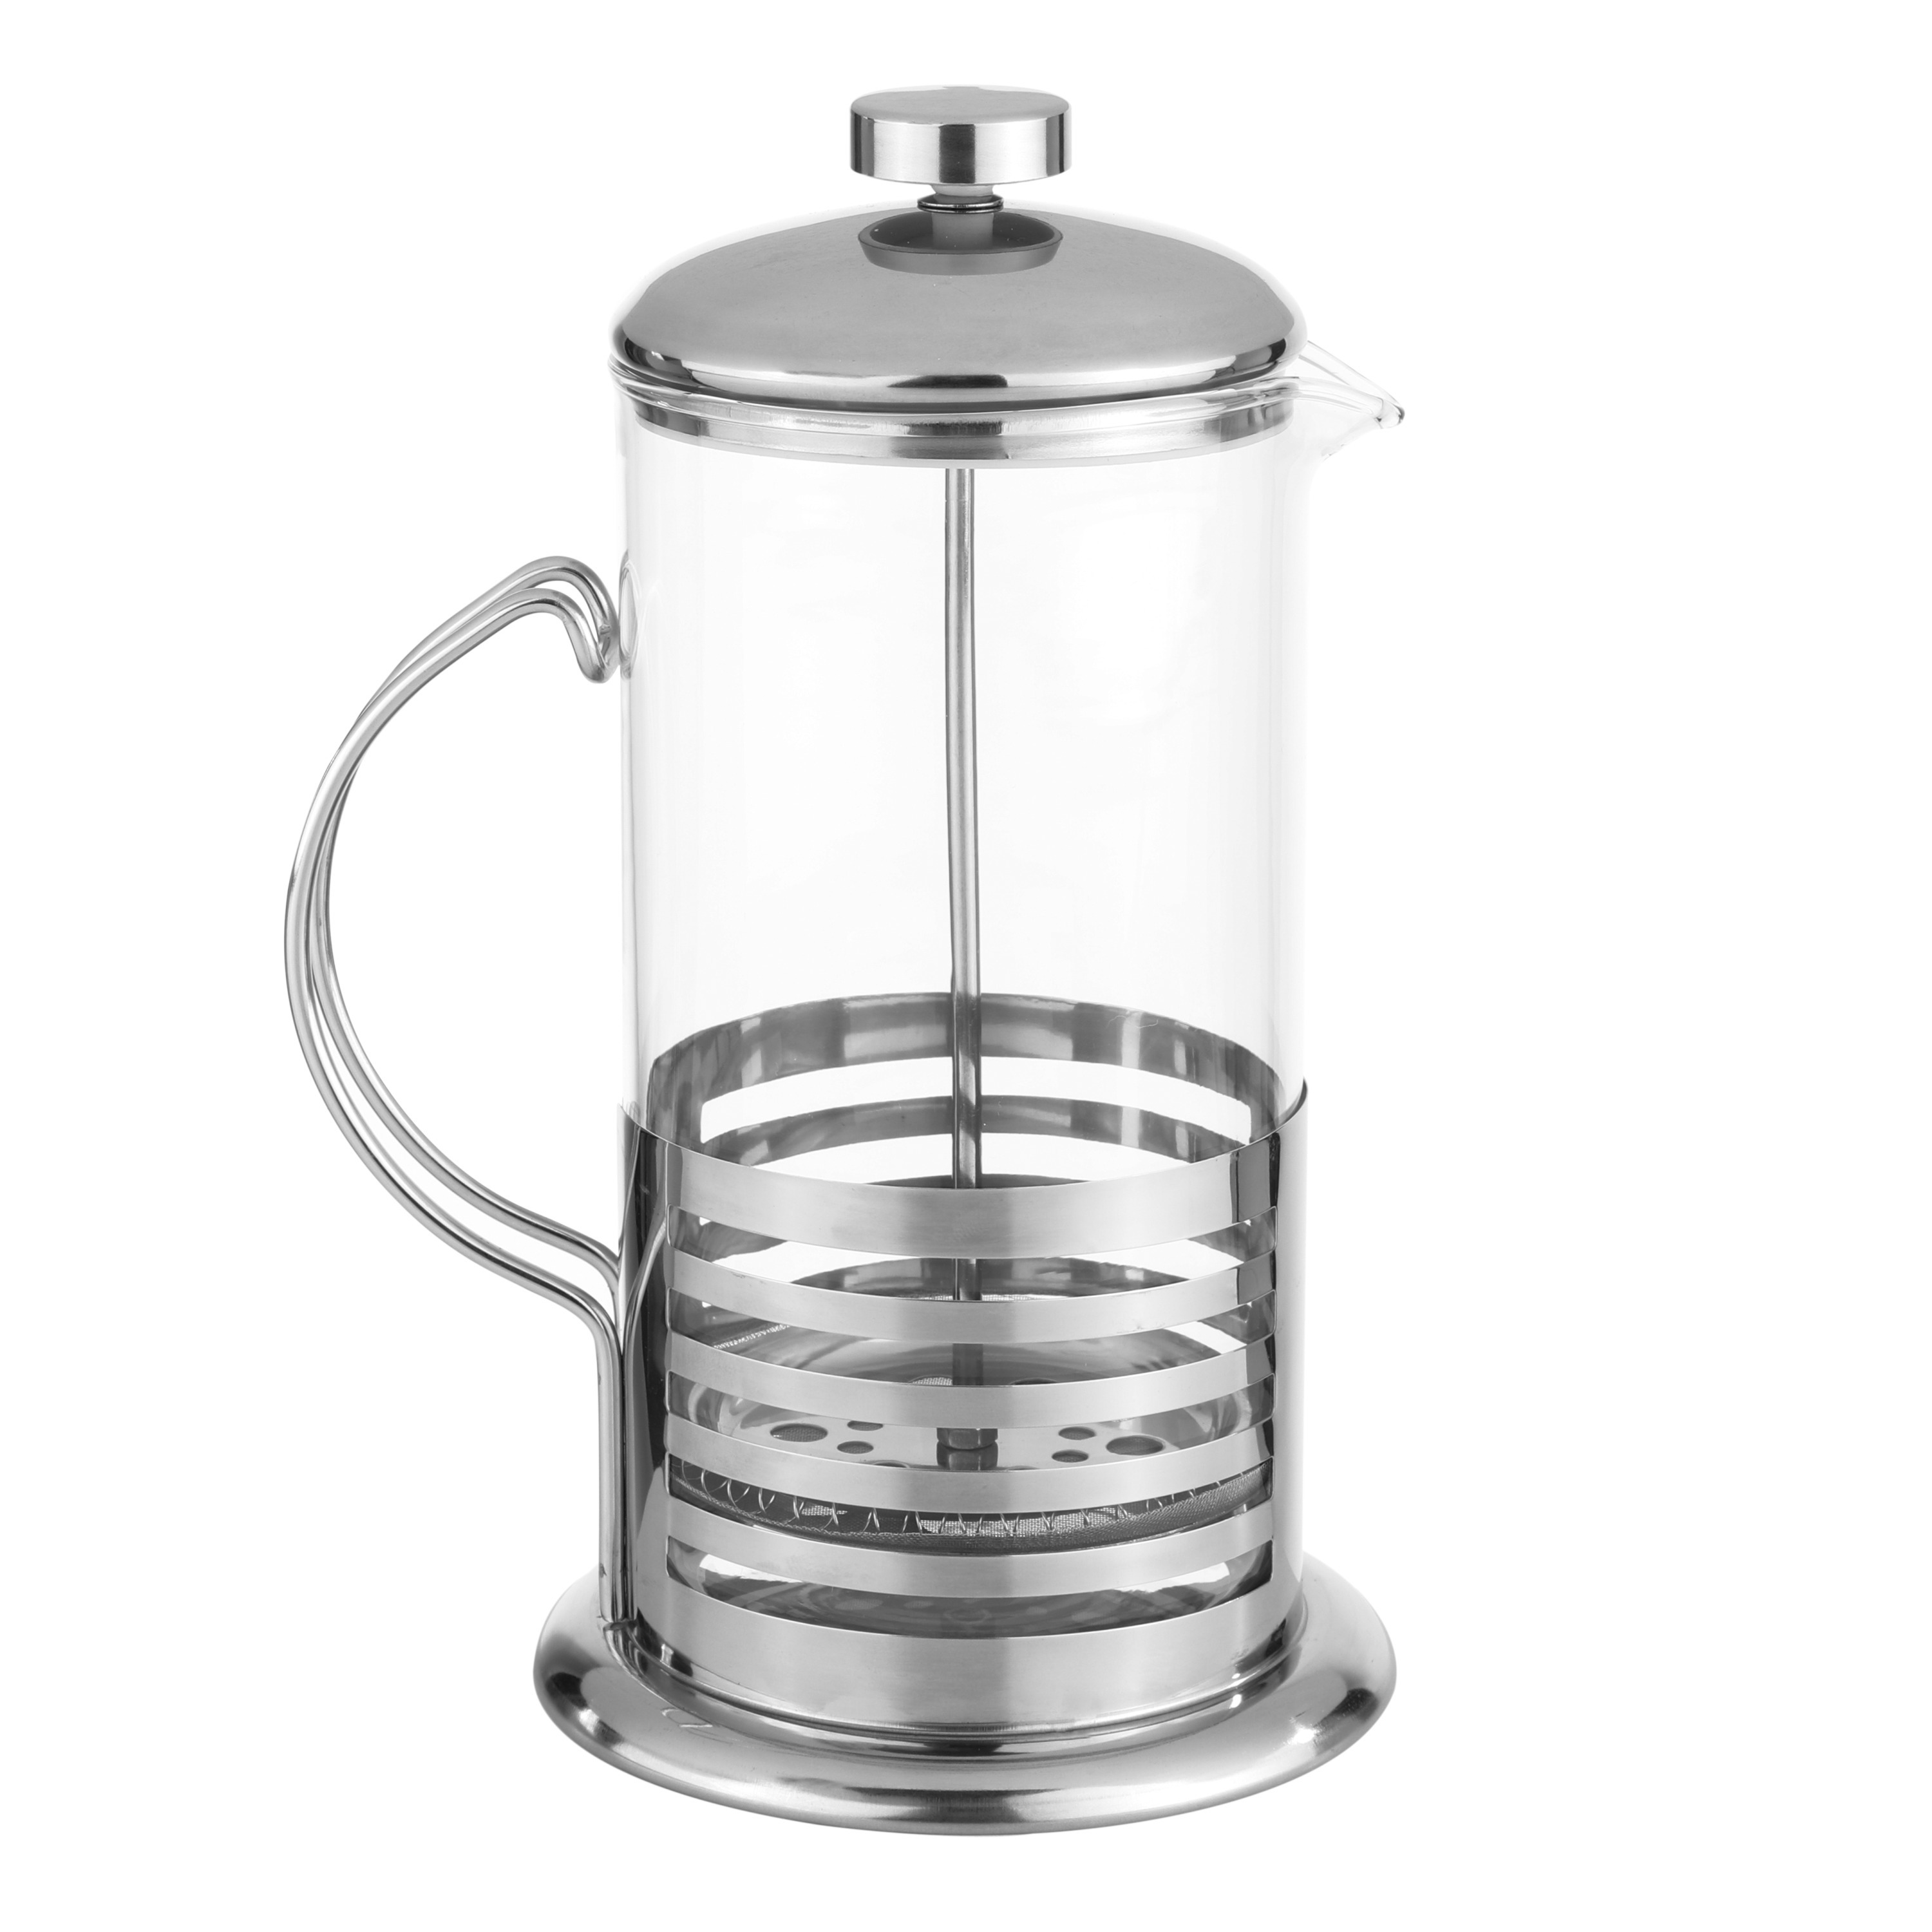 French press koffie-thee maker-cafetiere glas-RVS 1liter